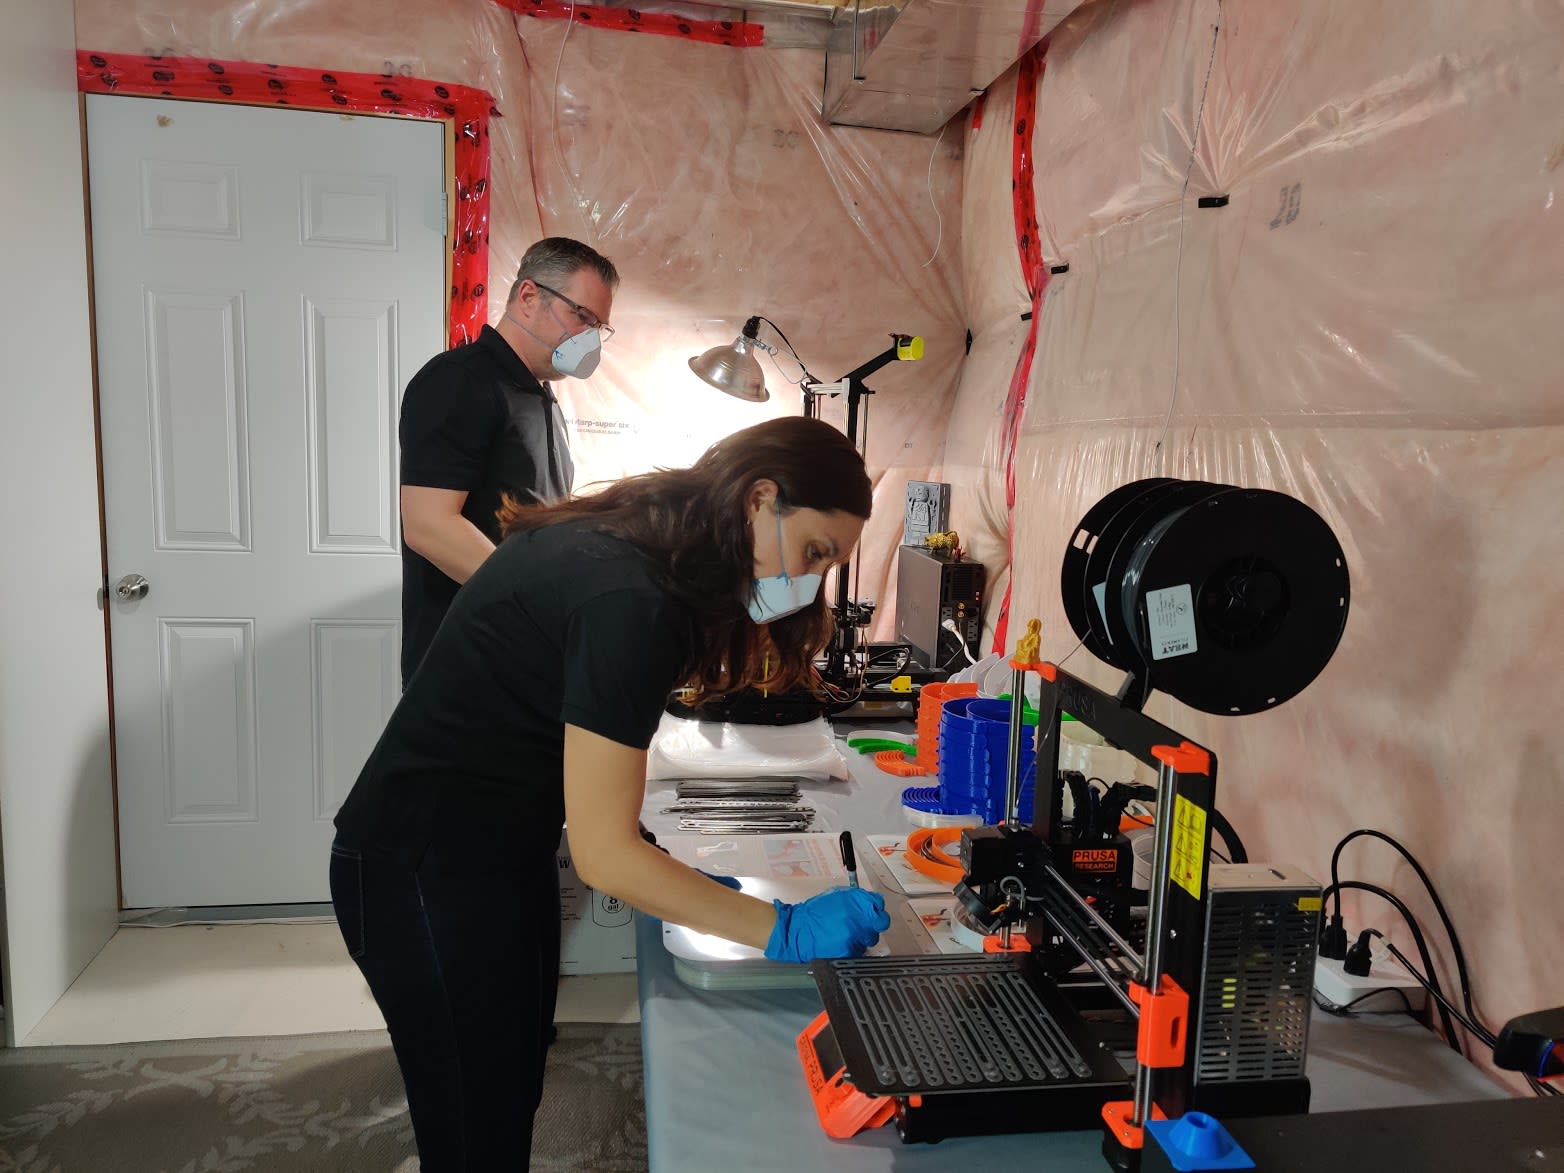 the husband and wife working near 3D printers.